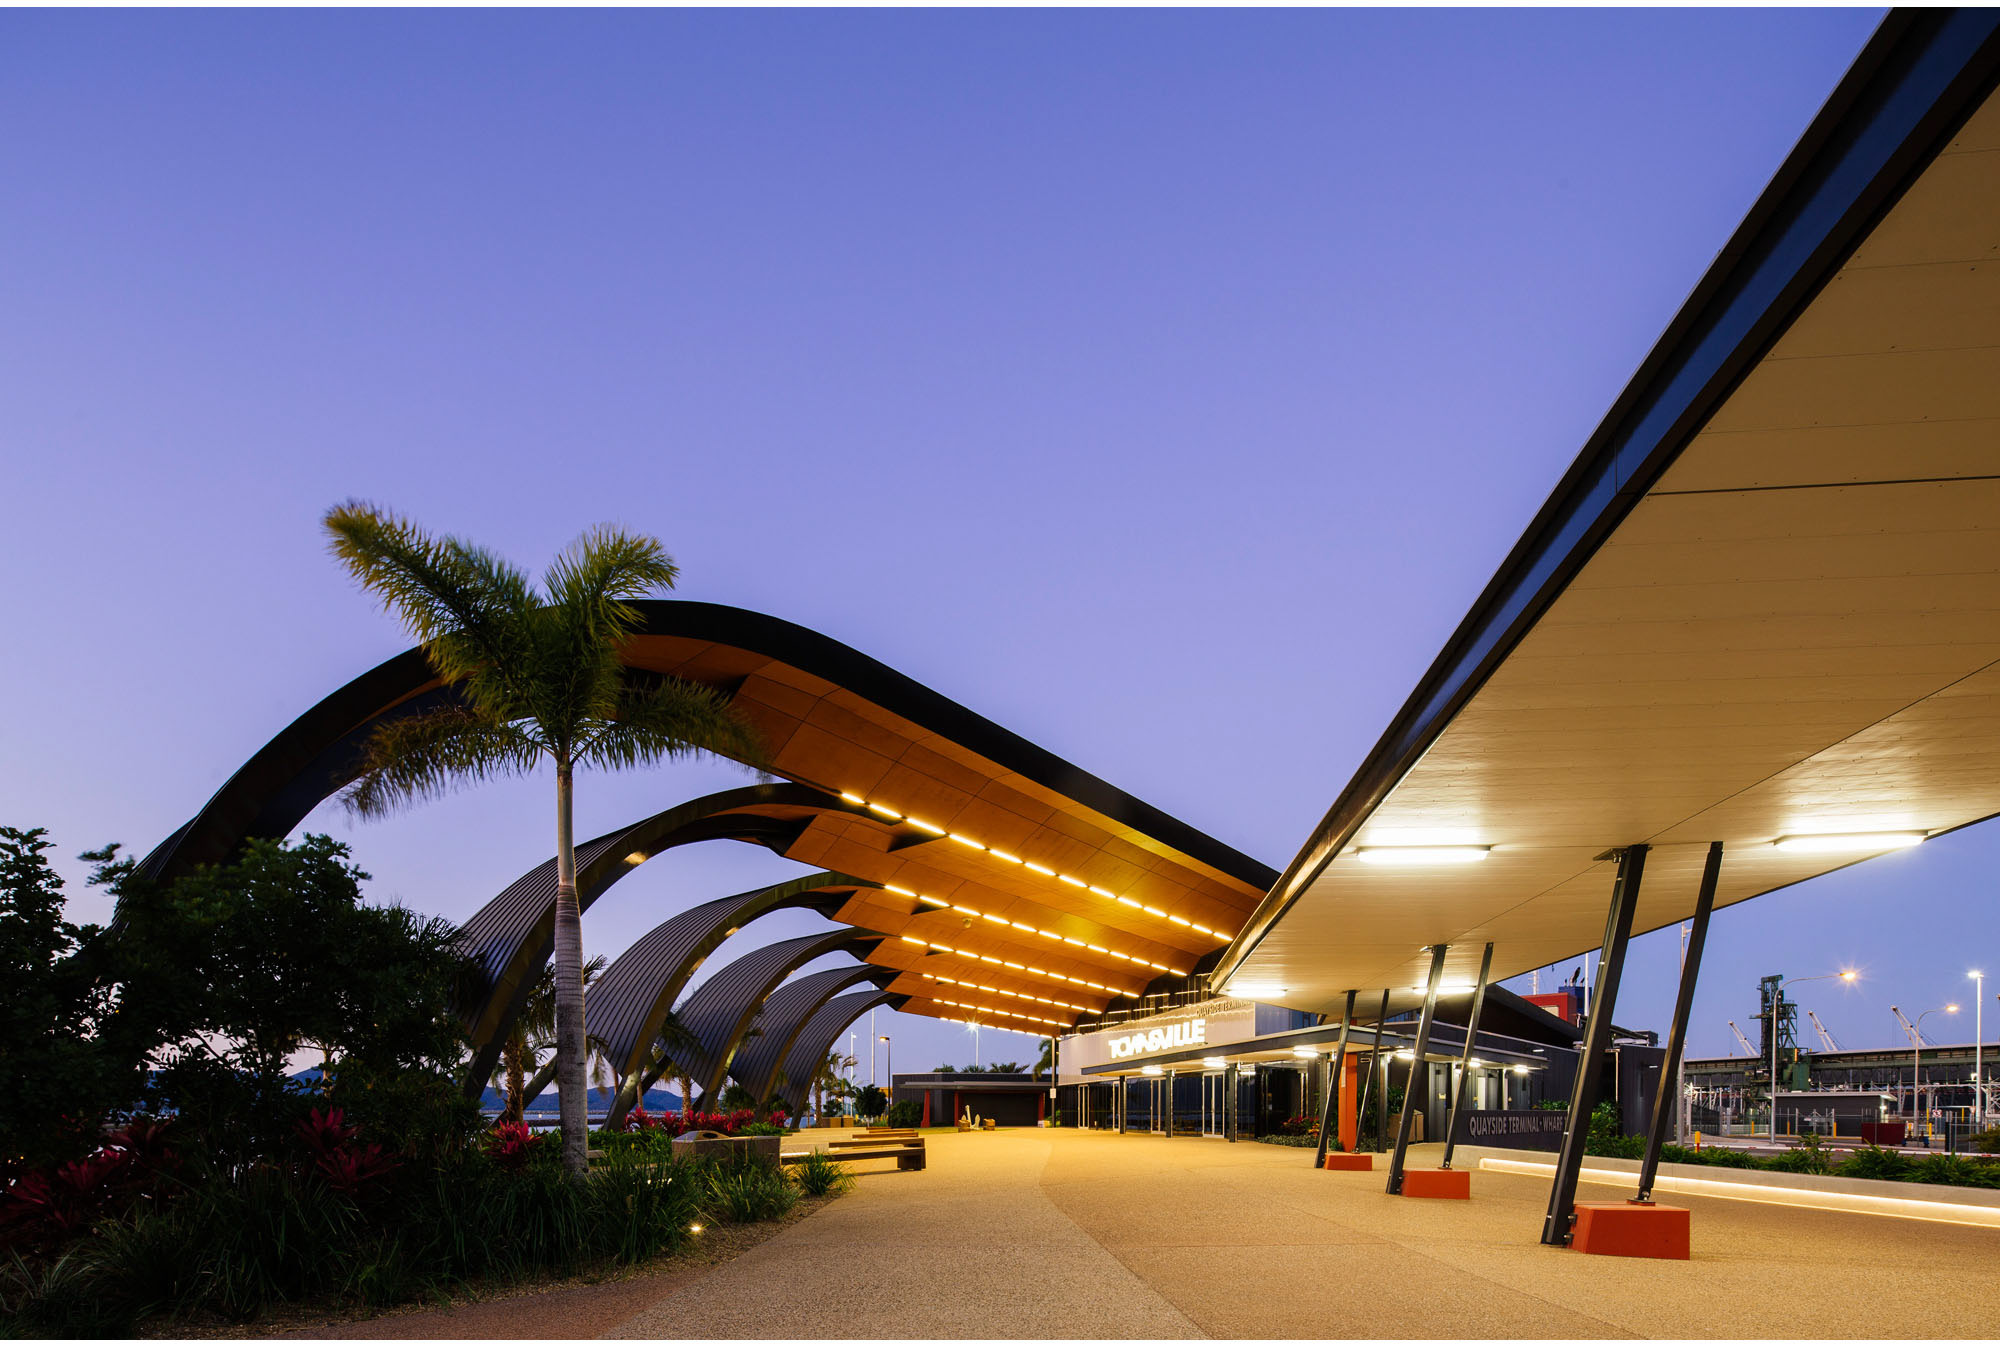 Quayside Cruise Ship Terminal in Townsville